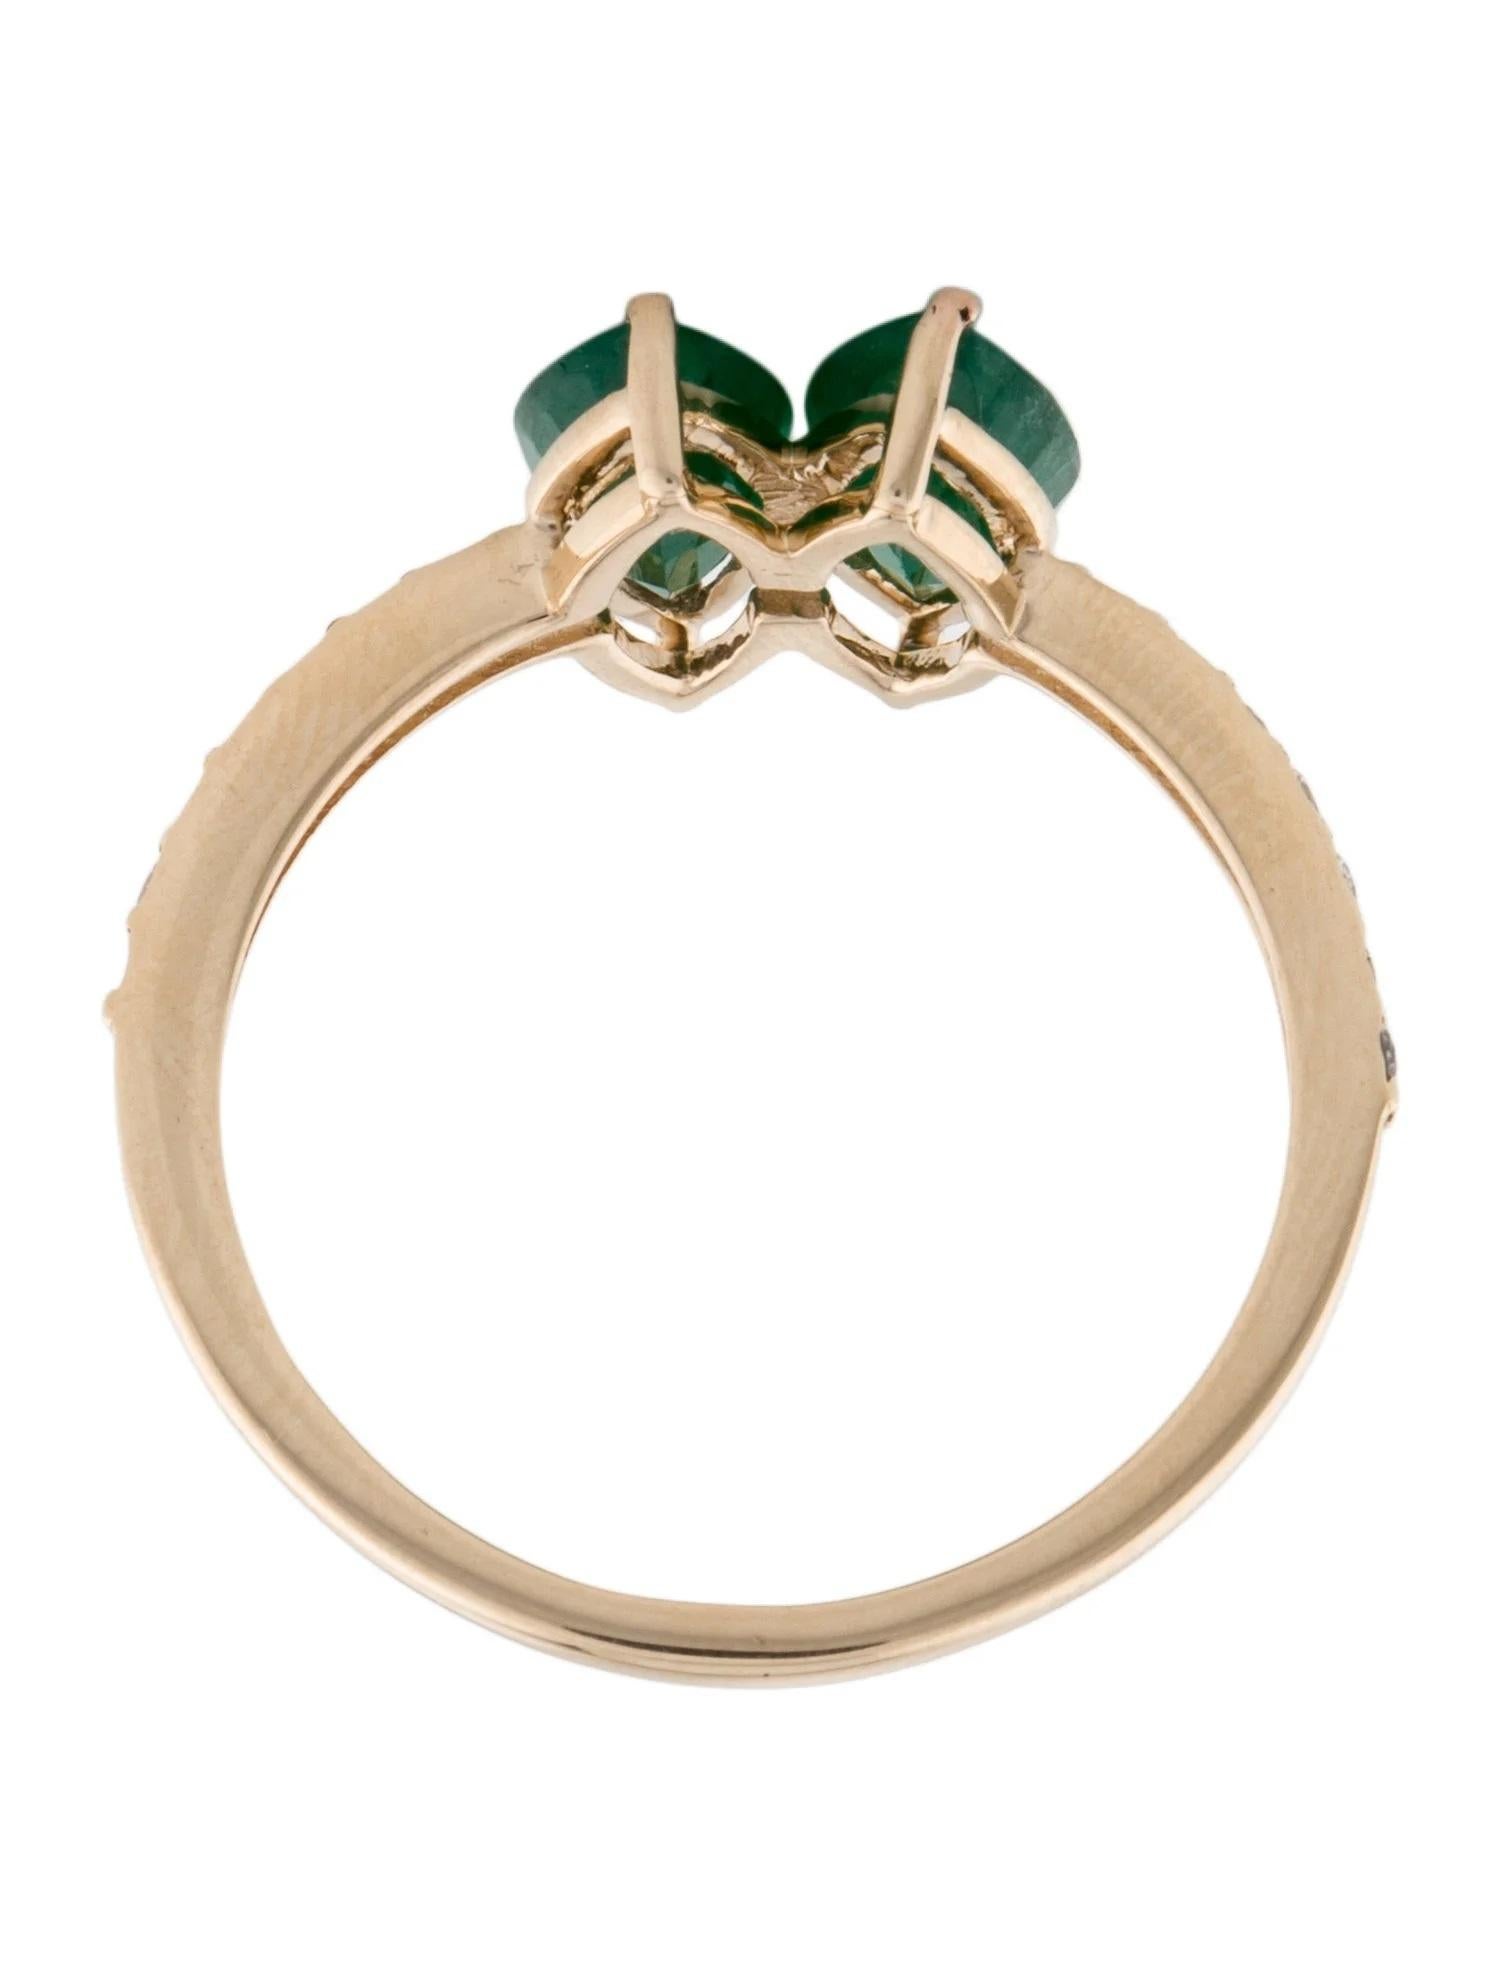 14K Yellow Gold 1.52ctw Emerald & Diamond Cocktail Ring Size 6.5 In New Condition For Sale In Holtsville, NY